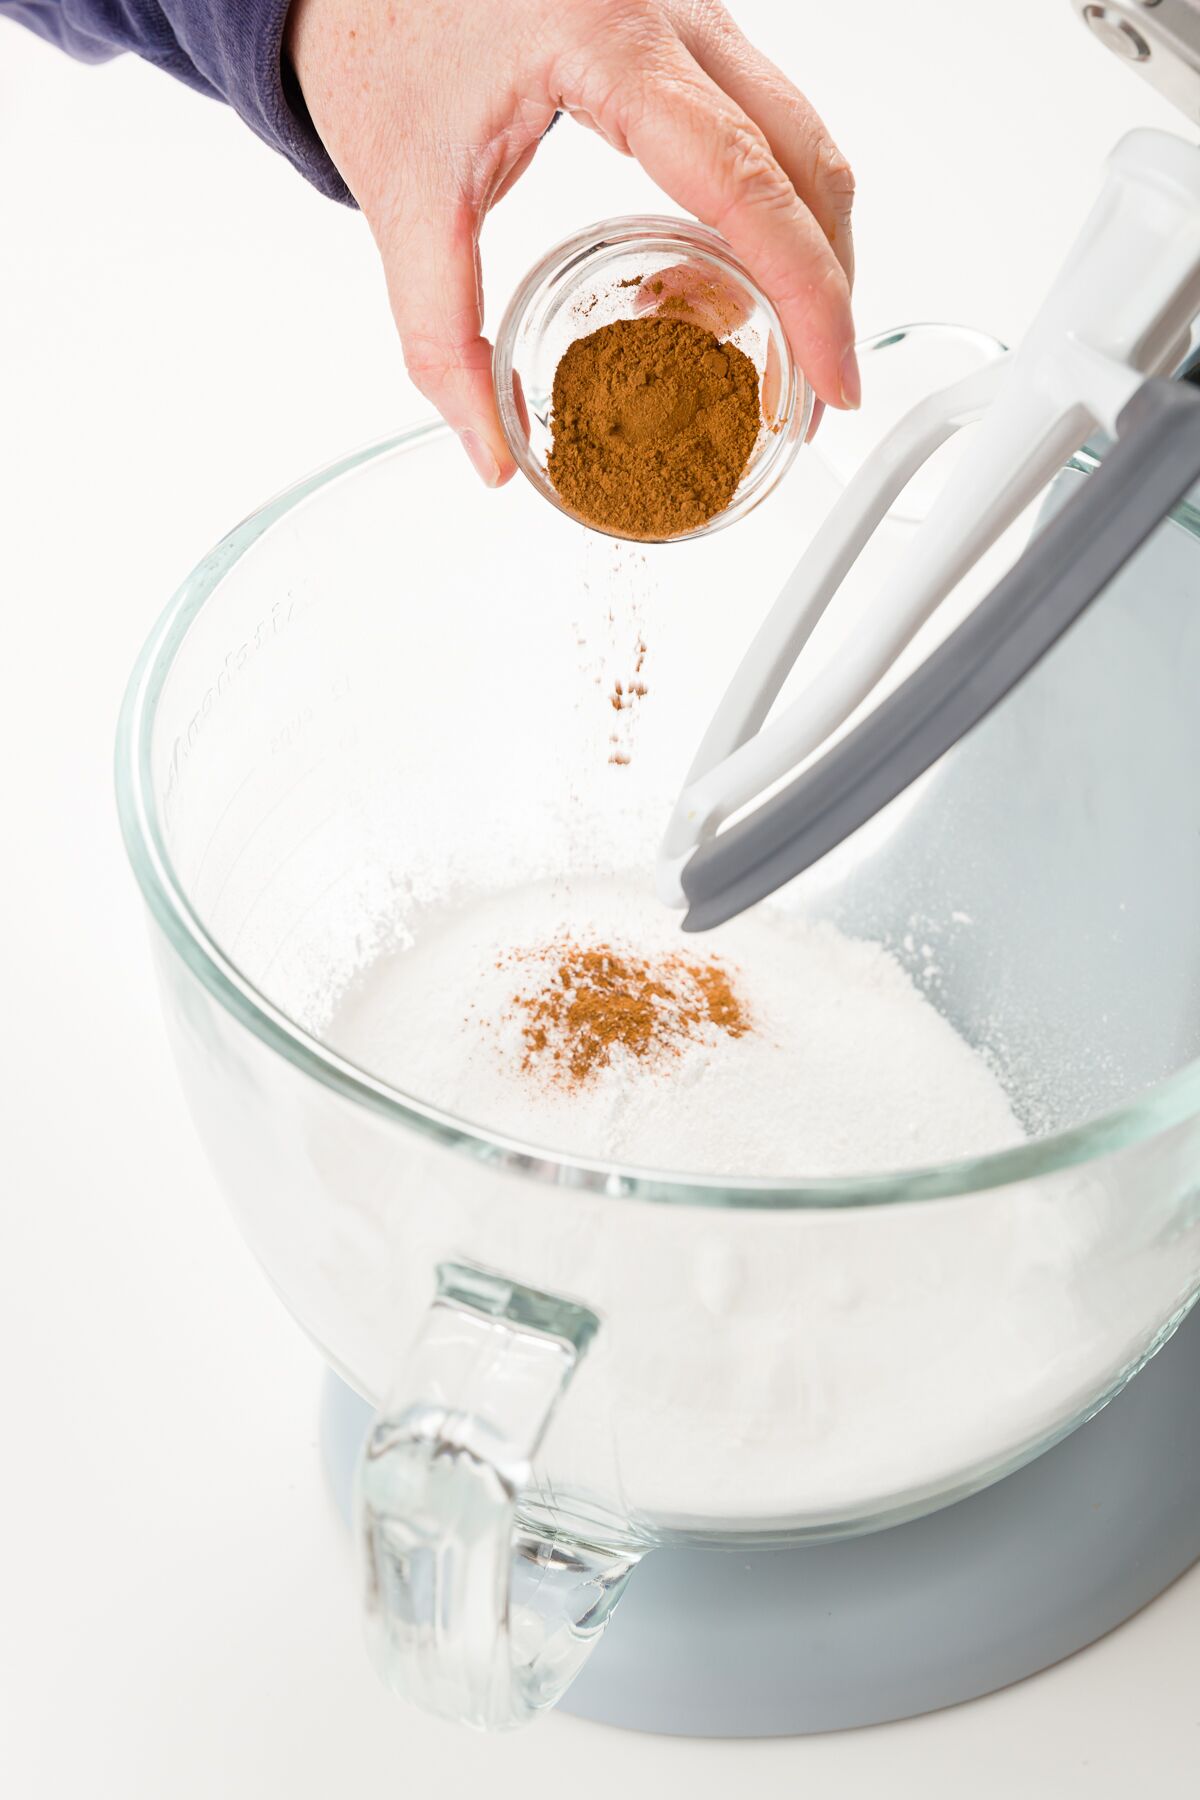 Adding cinnamon to dry ingredients in stand mixer